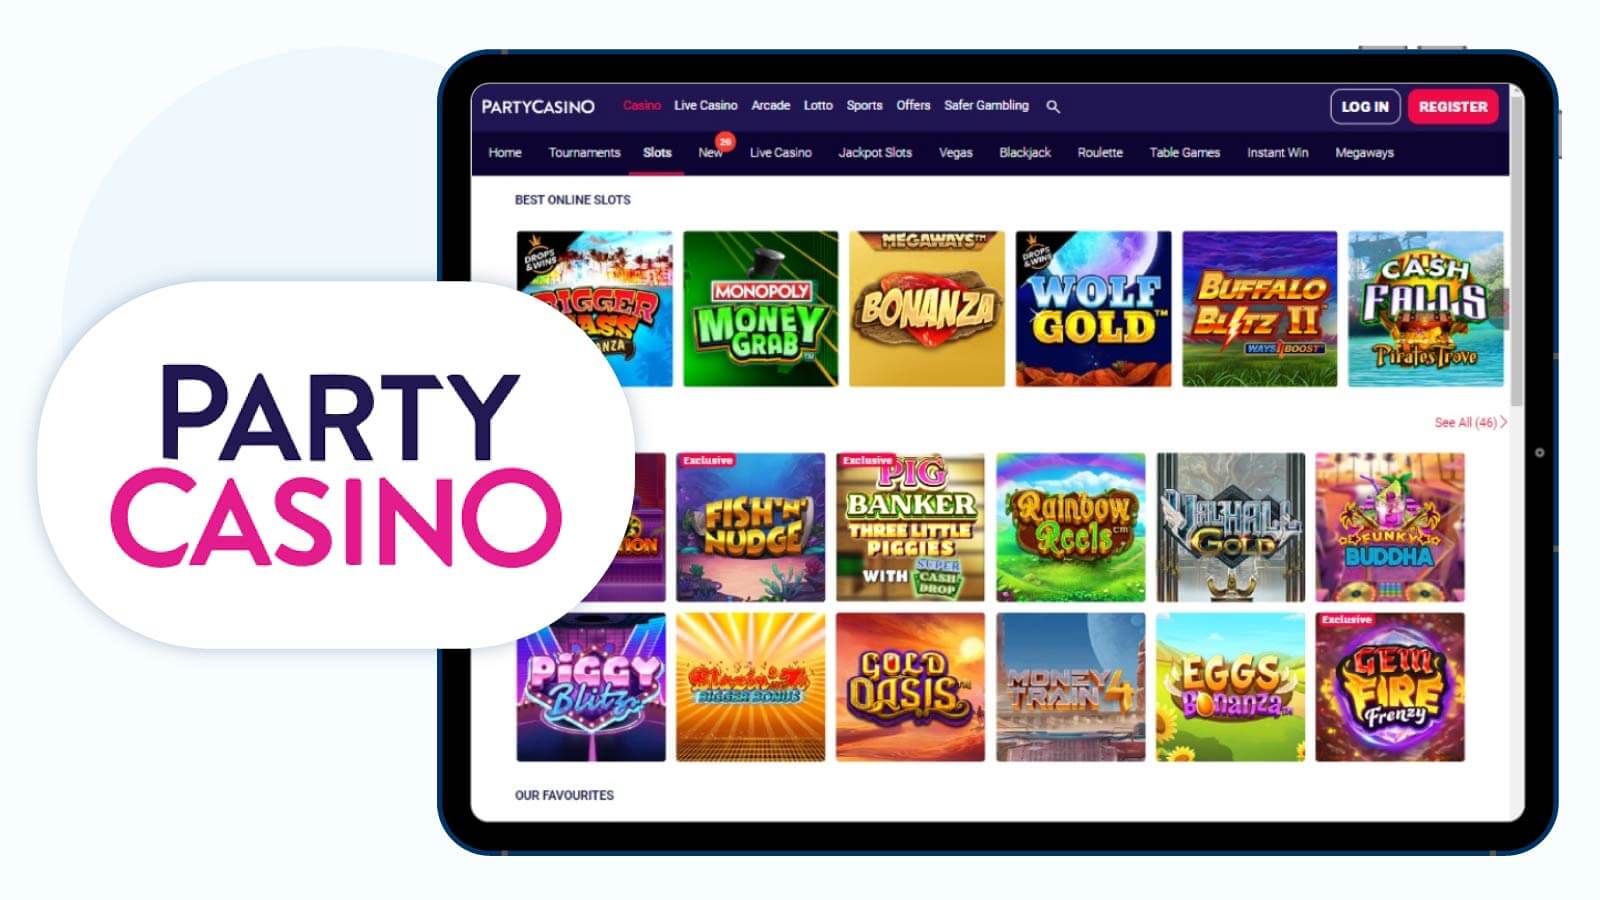 Party-Casino Top-UK-Google-Pay-Slot-Site-in-the-UK